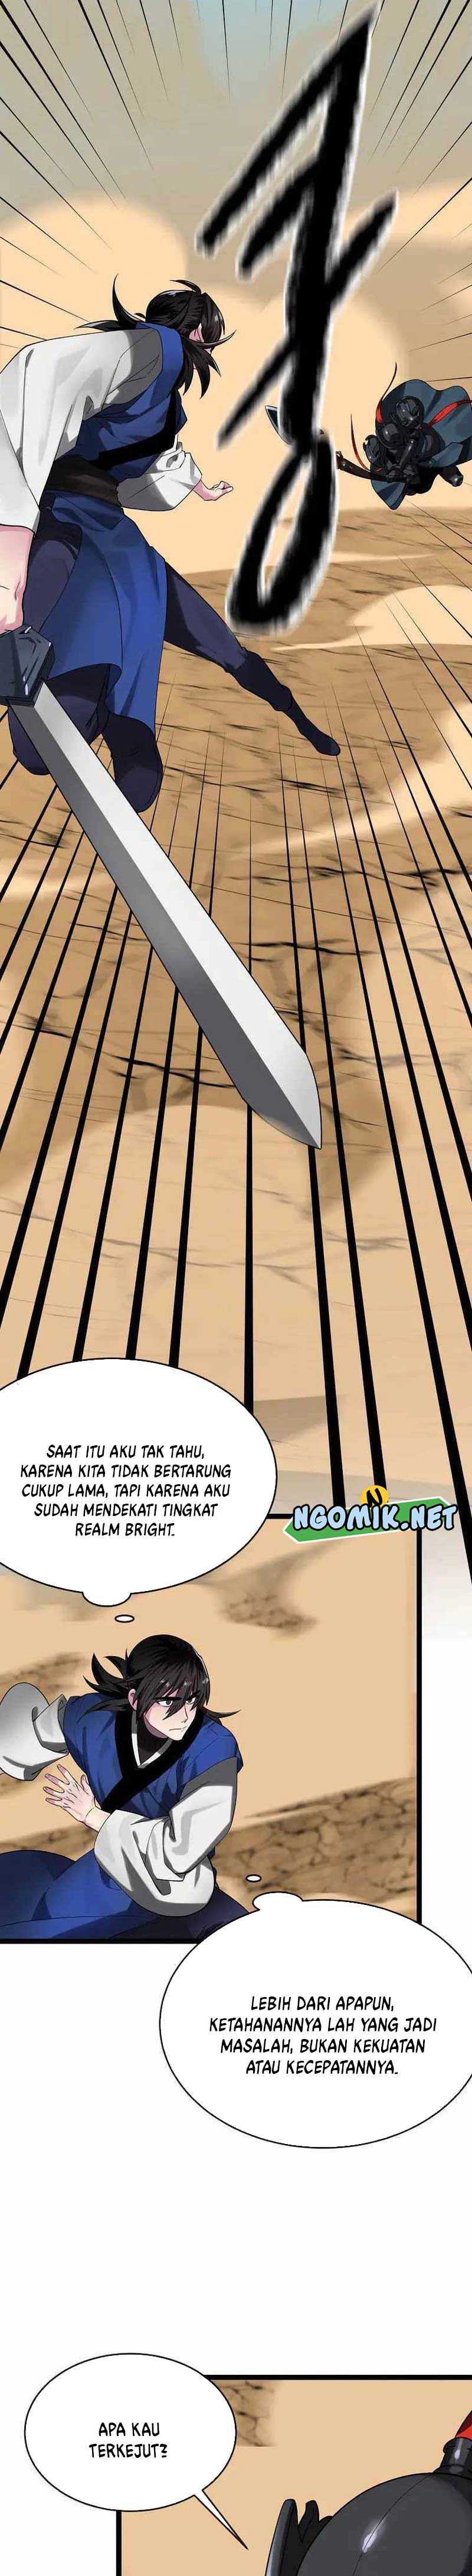 Volcanic Age Chapter 244